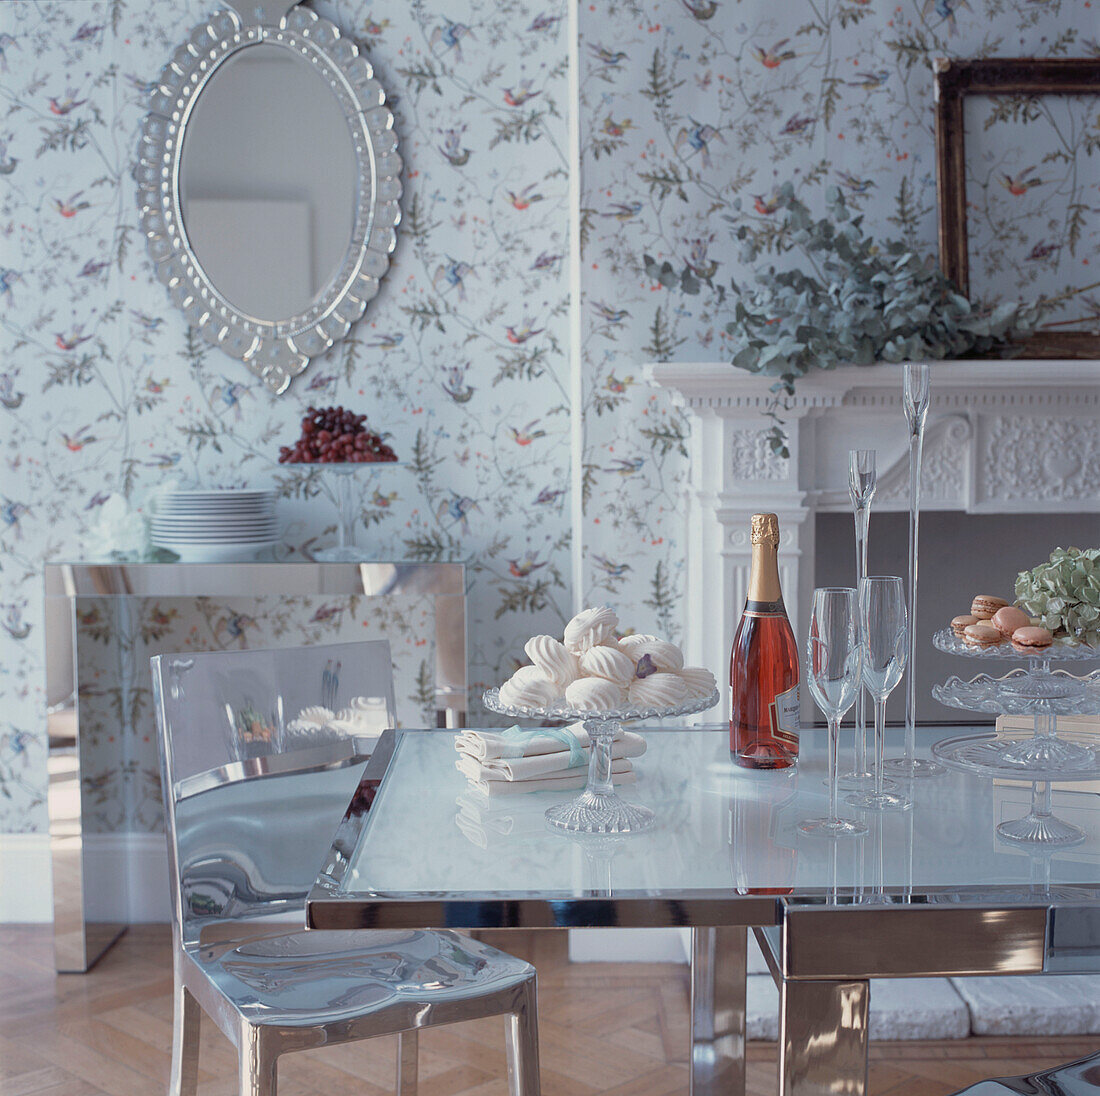 Contemporary pretty floral wallpapered dining room with lunch time table setting